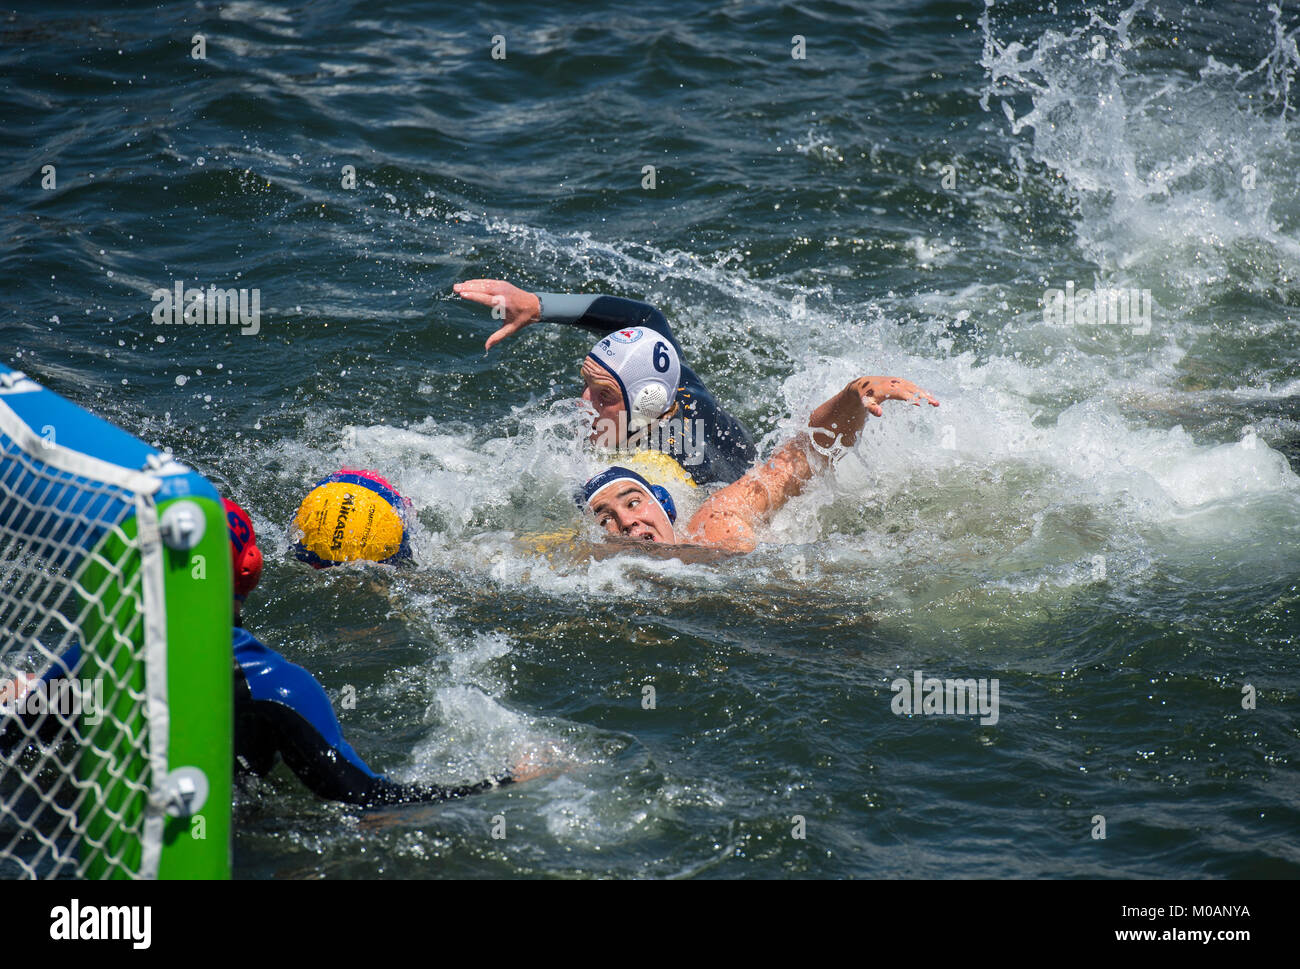 Action from a water polo match being played in Cape Town, South Africa Stock Photo